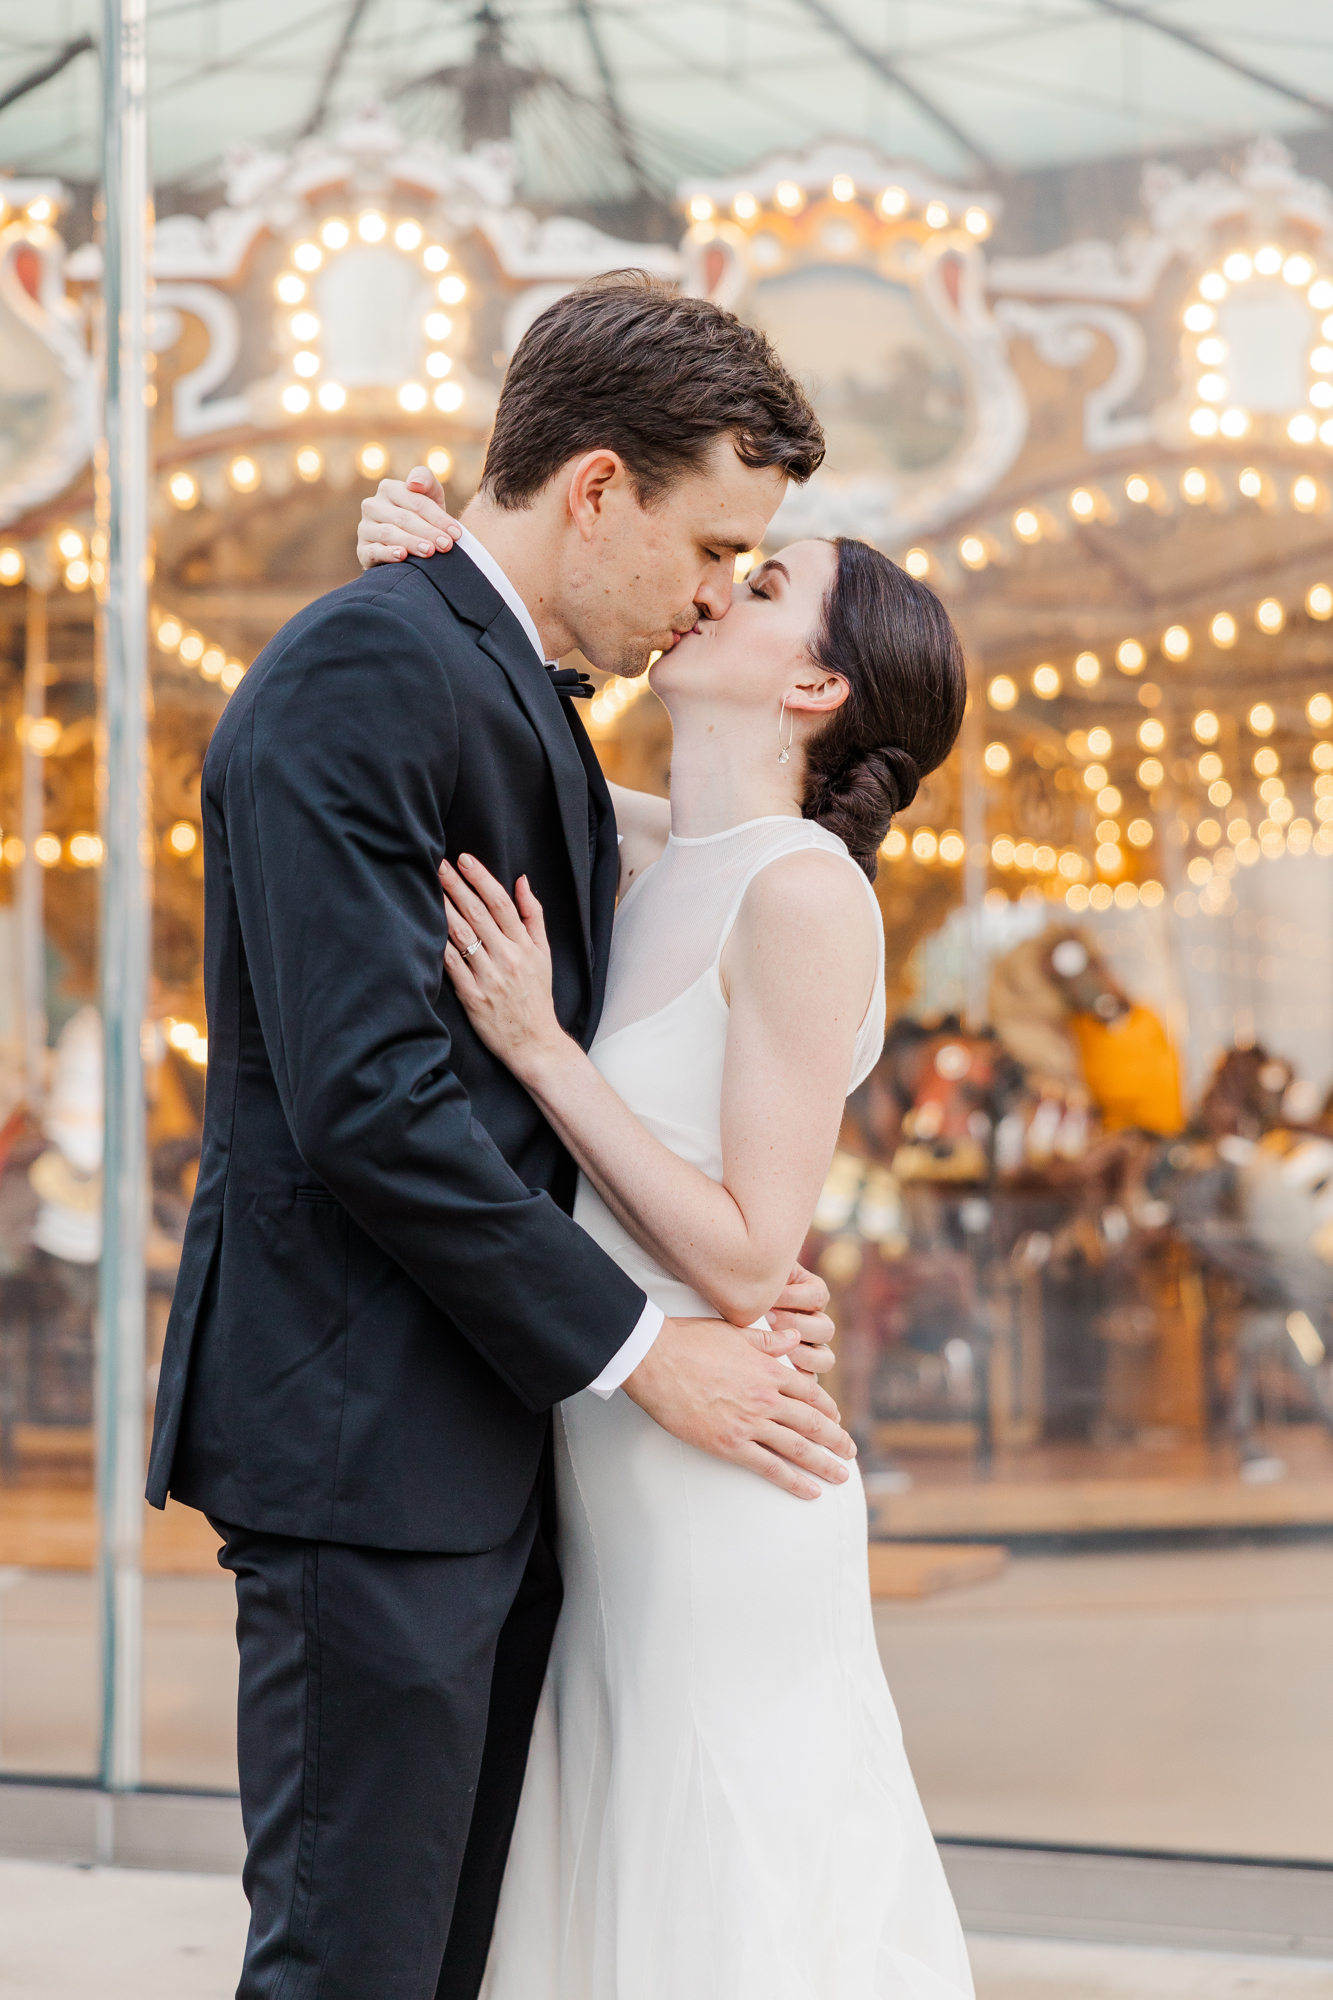 Jaw-dropping DUMBO, Brooklyn Wedding Photos at Smack Mellon and Jane's Carousel